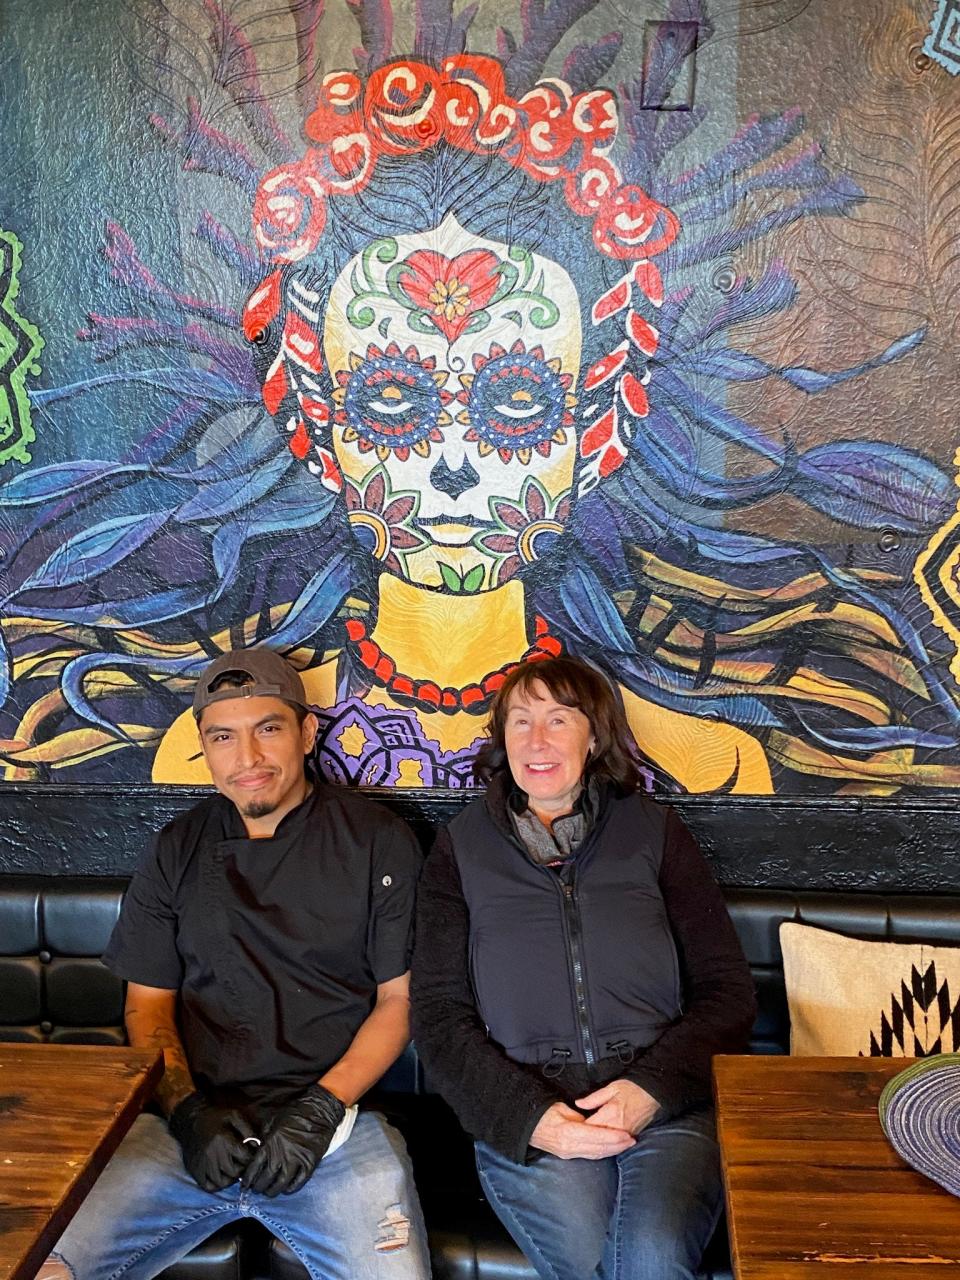 Executive Chef Emmanuel Corona and owner Peggy Magister are shown at La Dama Mexican Kitchen and Bar. Magister shifted her longtime Walker's Point restaurant from Crazy Water to La Dama.